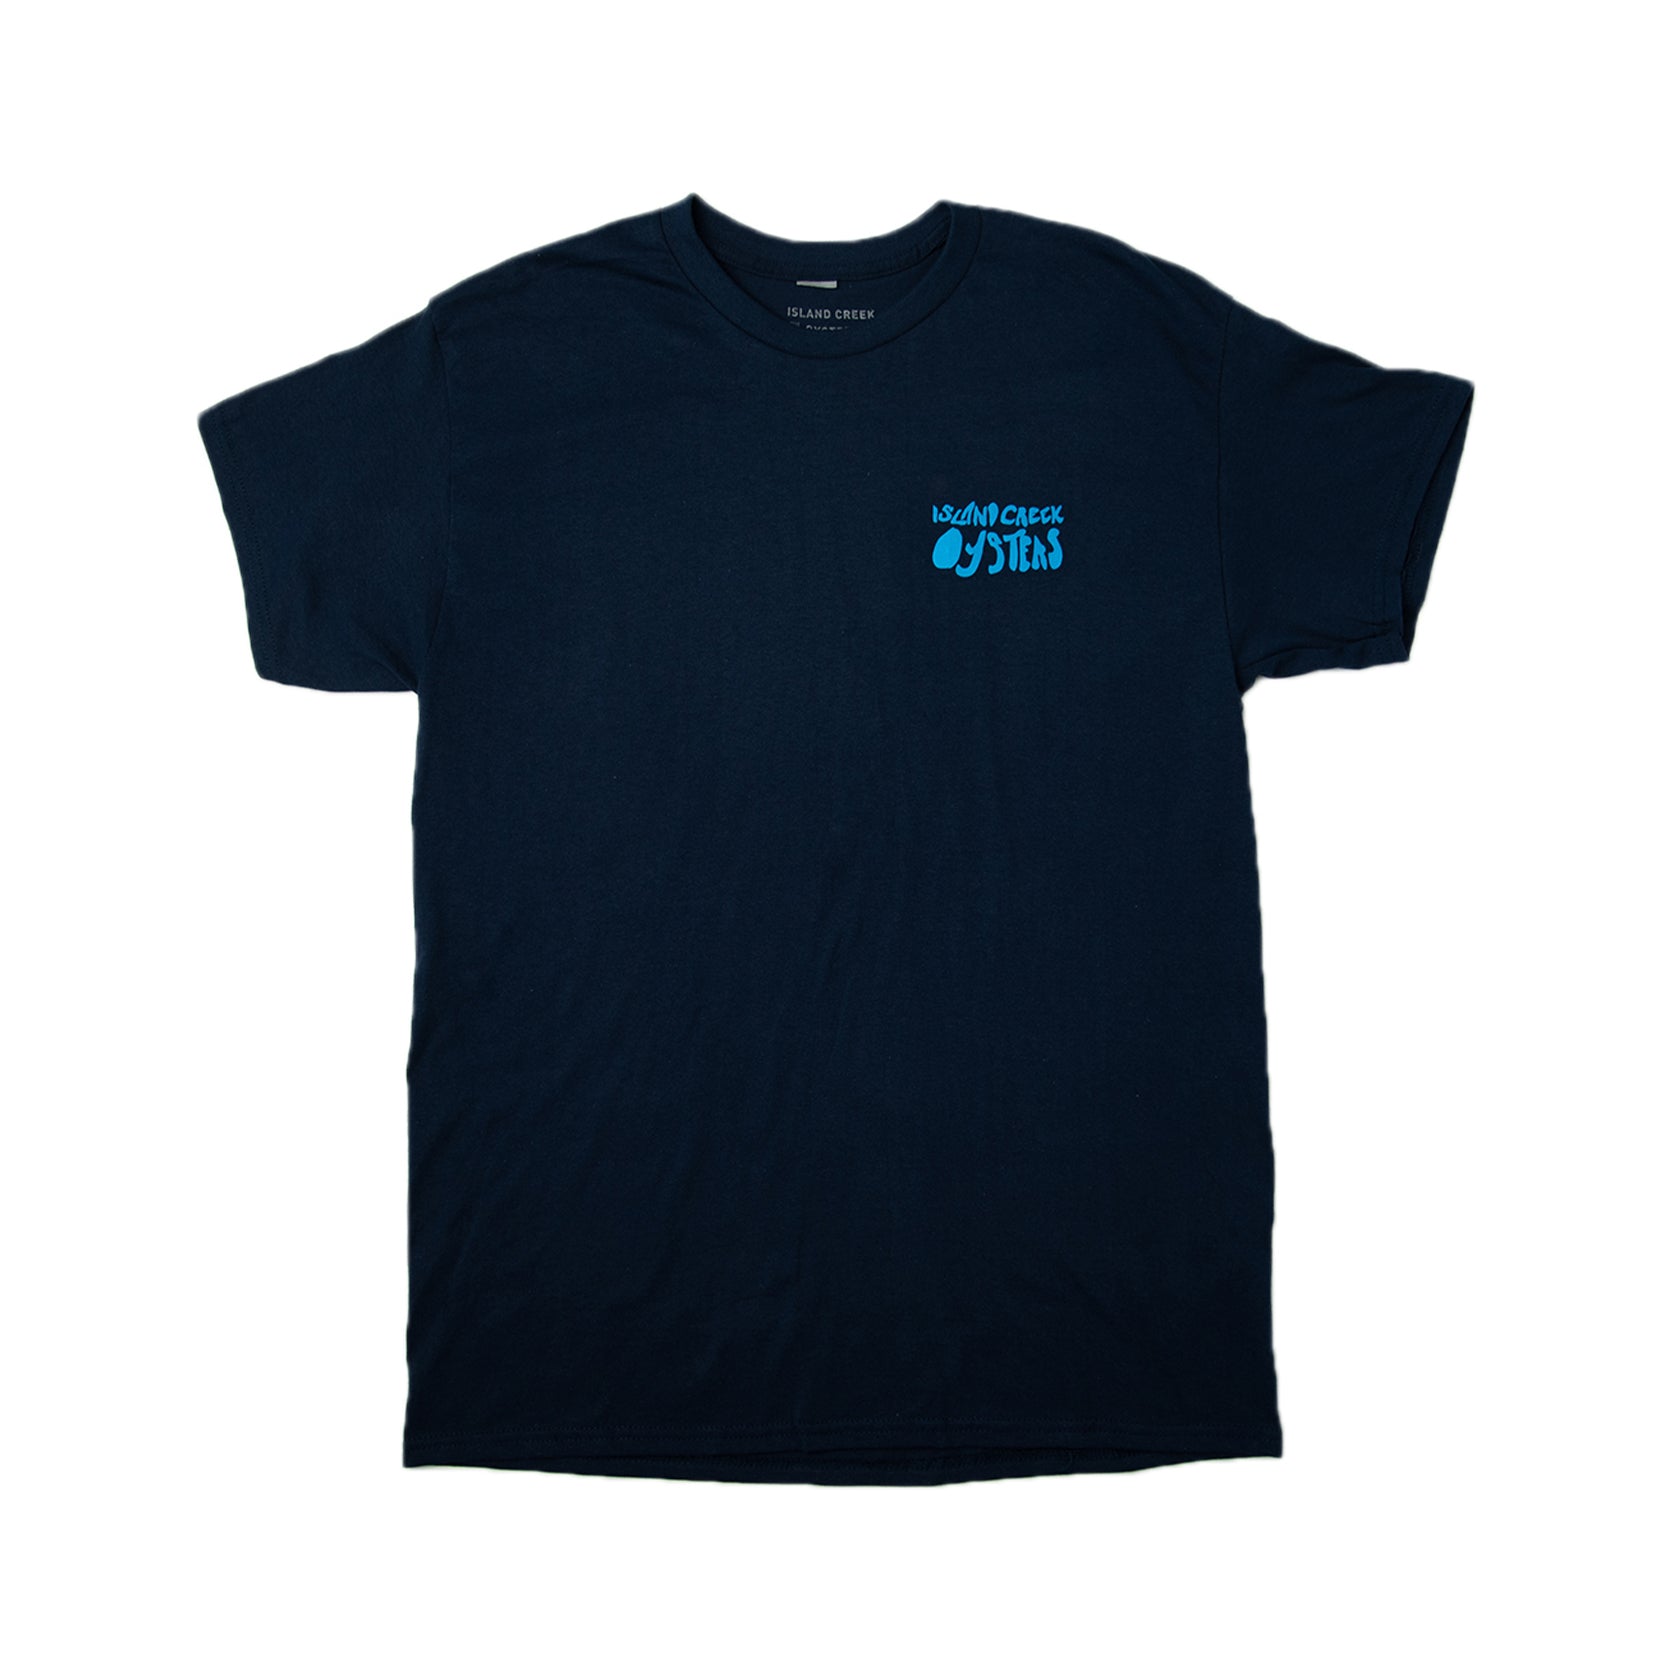 We'll Grow More Navy T-shirt - Island Creek Oysters | Buy Oysters Online